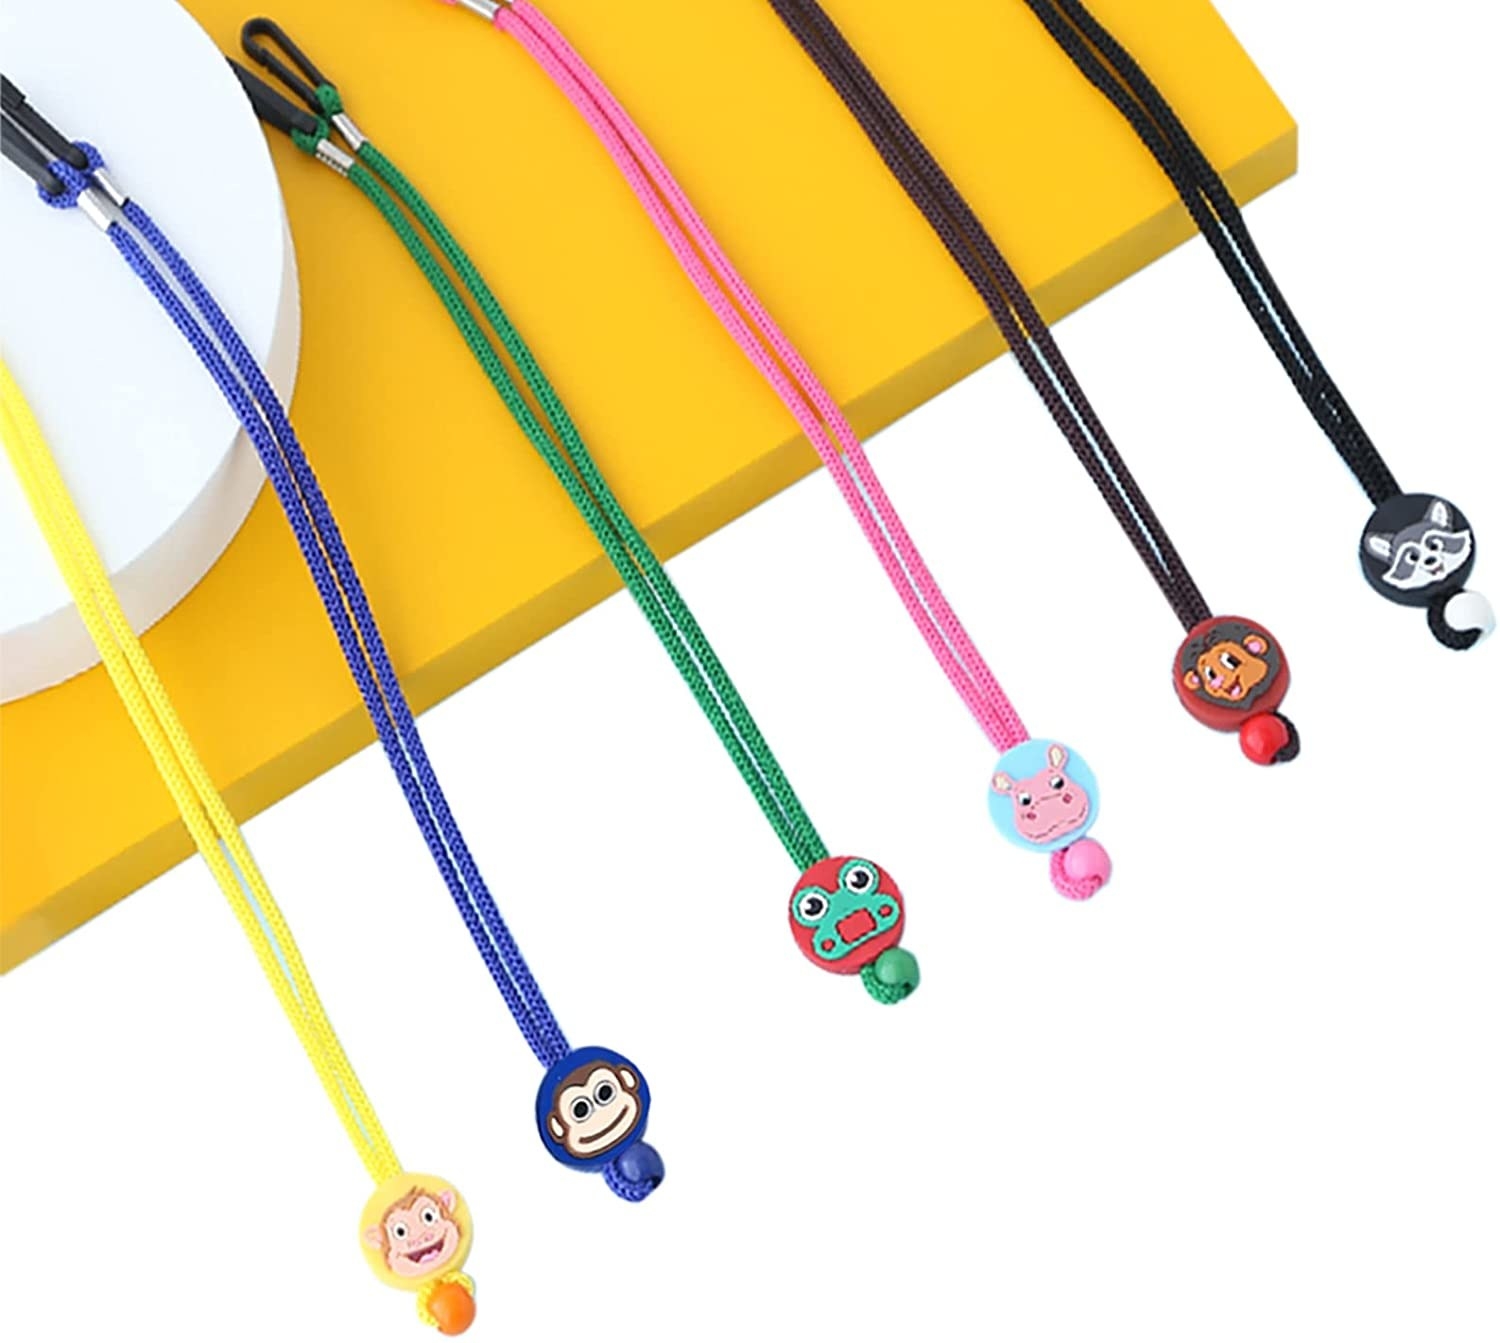 Six multicolored lanyards with cute animal character charms